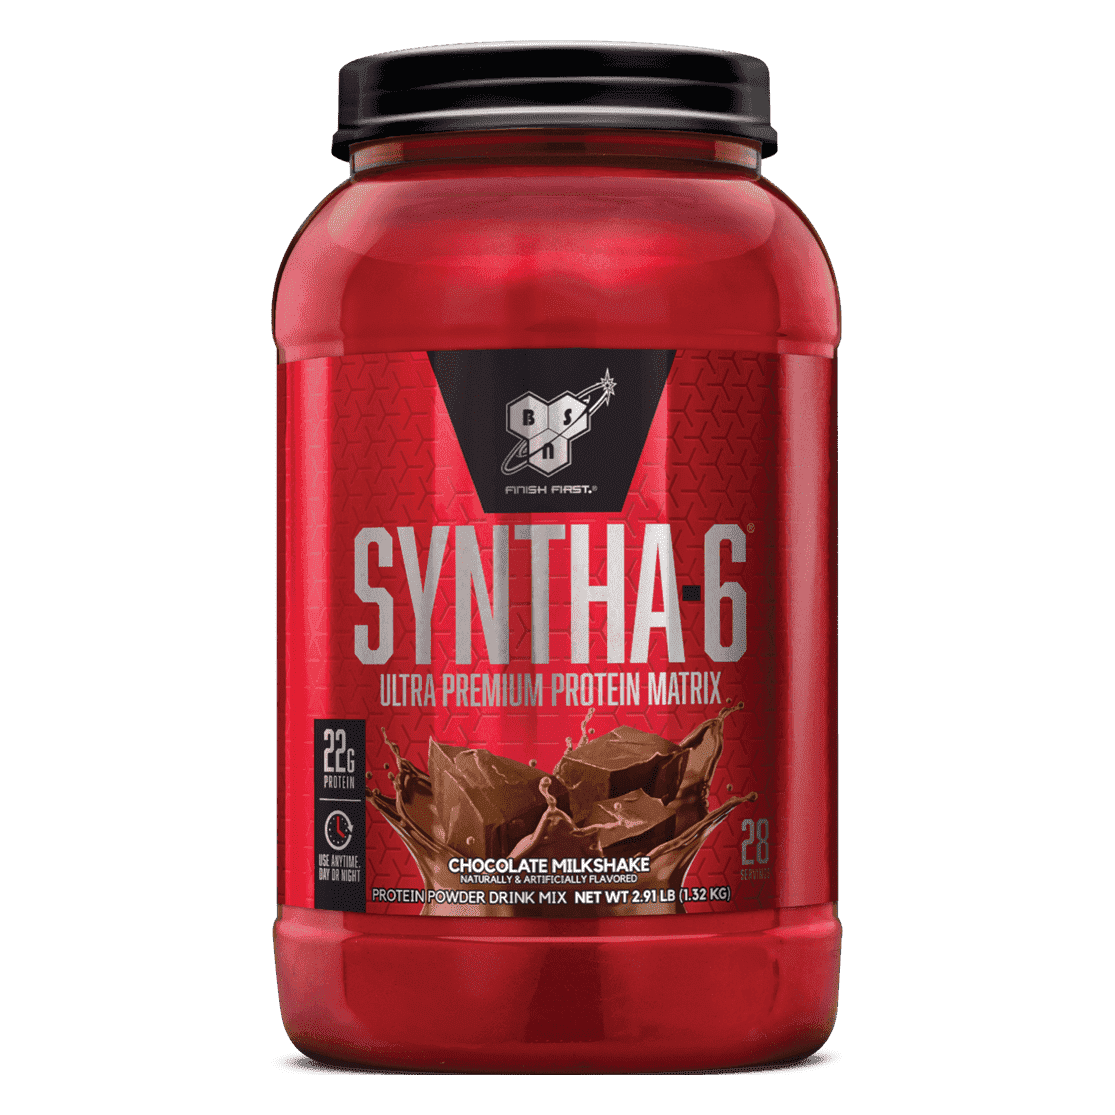 Bsn Syntha 6 - Stacked Supps